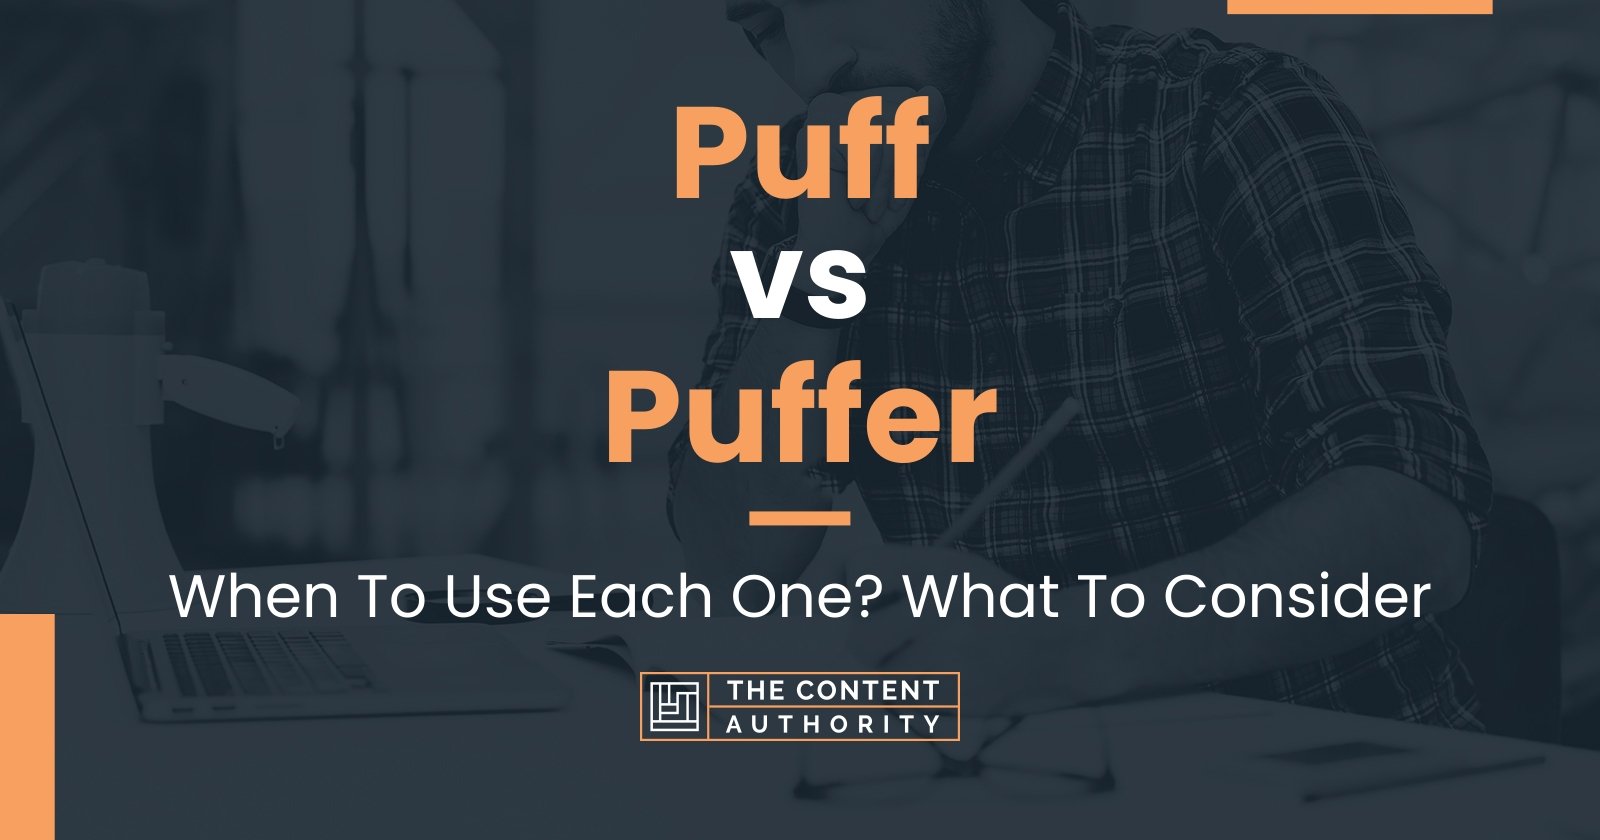 Puff vs Puffer: When To Use Each One? What To Consider